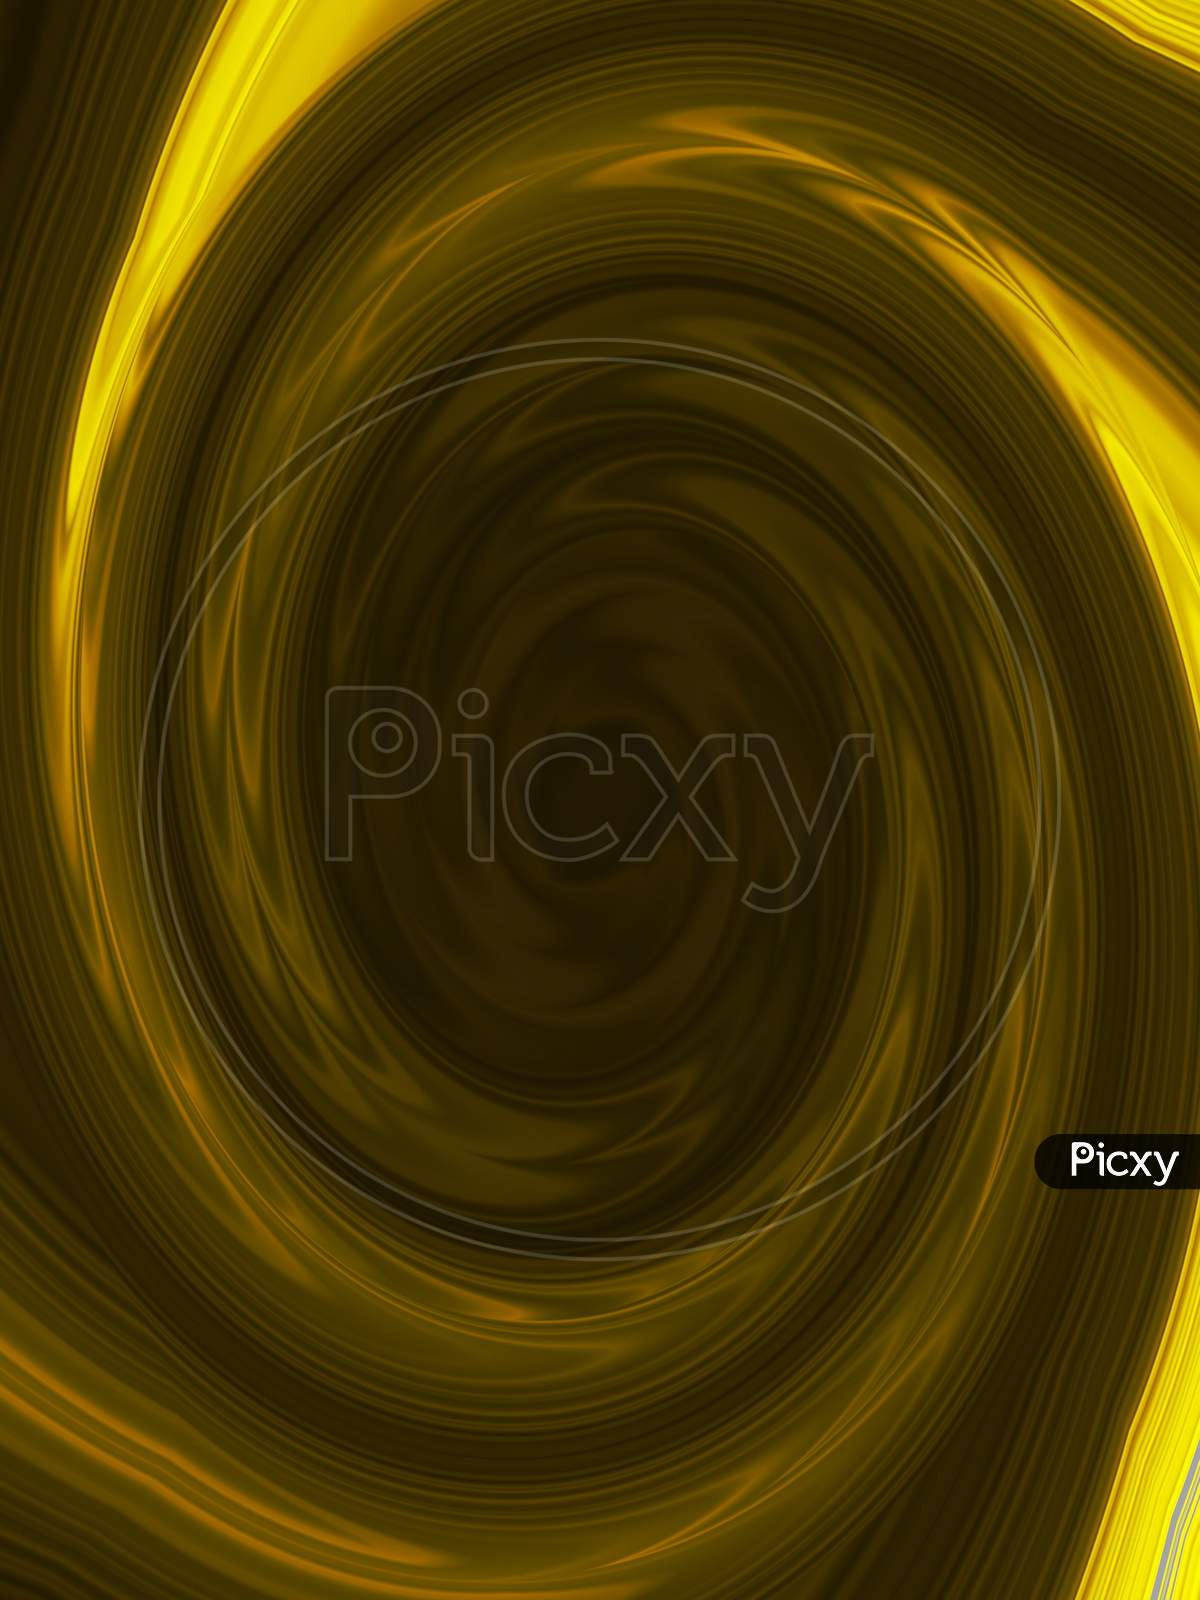 Rounding Frame Yellow Art Texture Raster Image Digital Creation Graphic Vector Abstract.